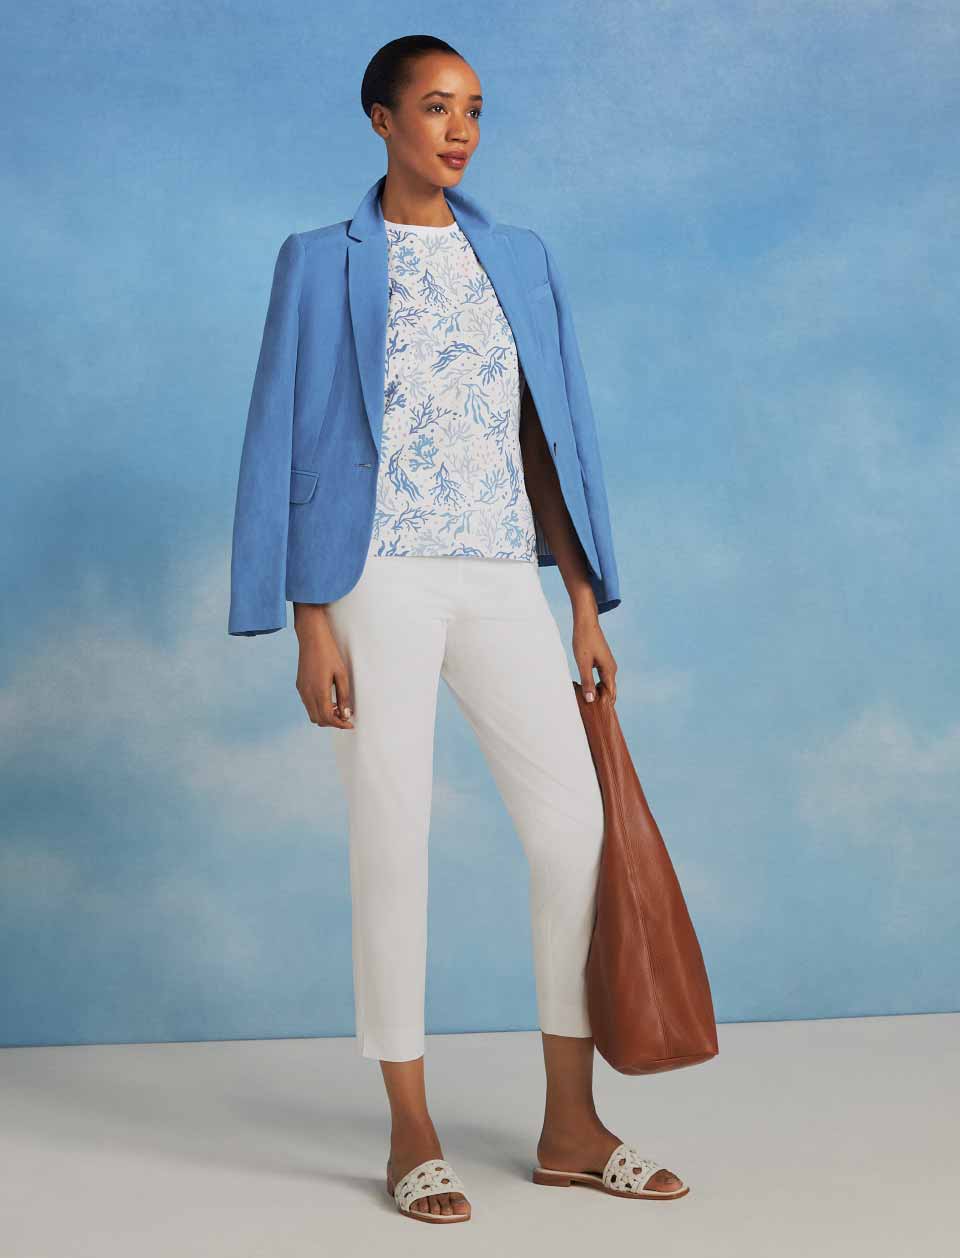 Model pictured in front of a sky blue background wearing a blazer, t-shirt and jeans. 